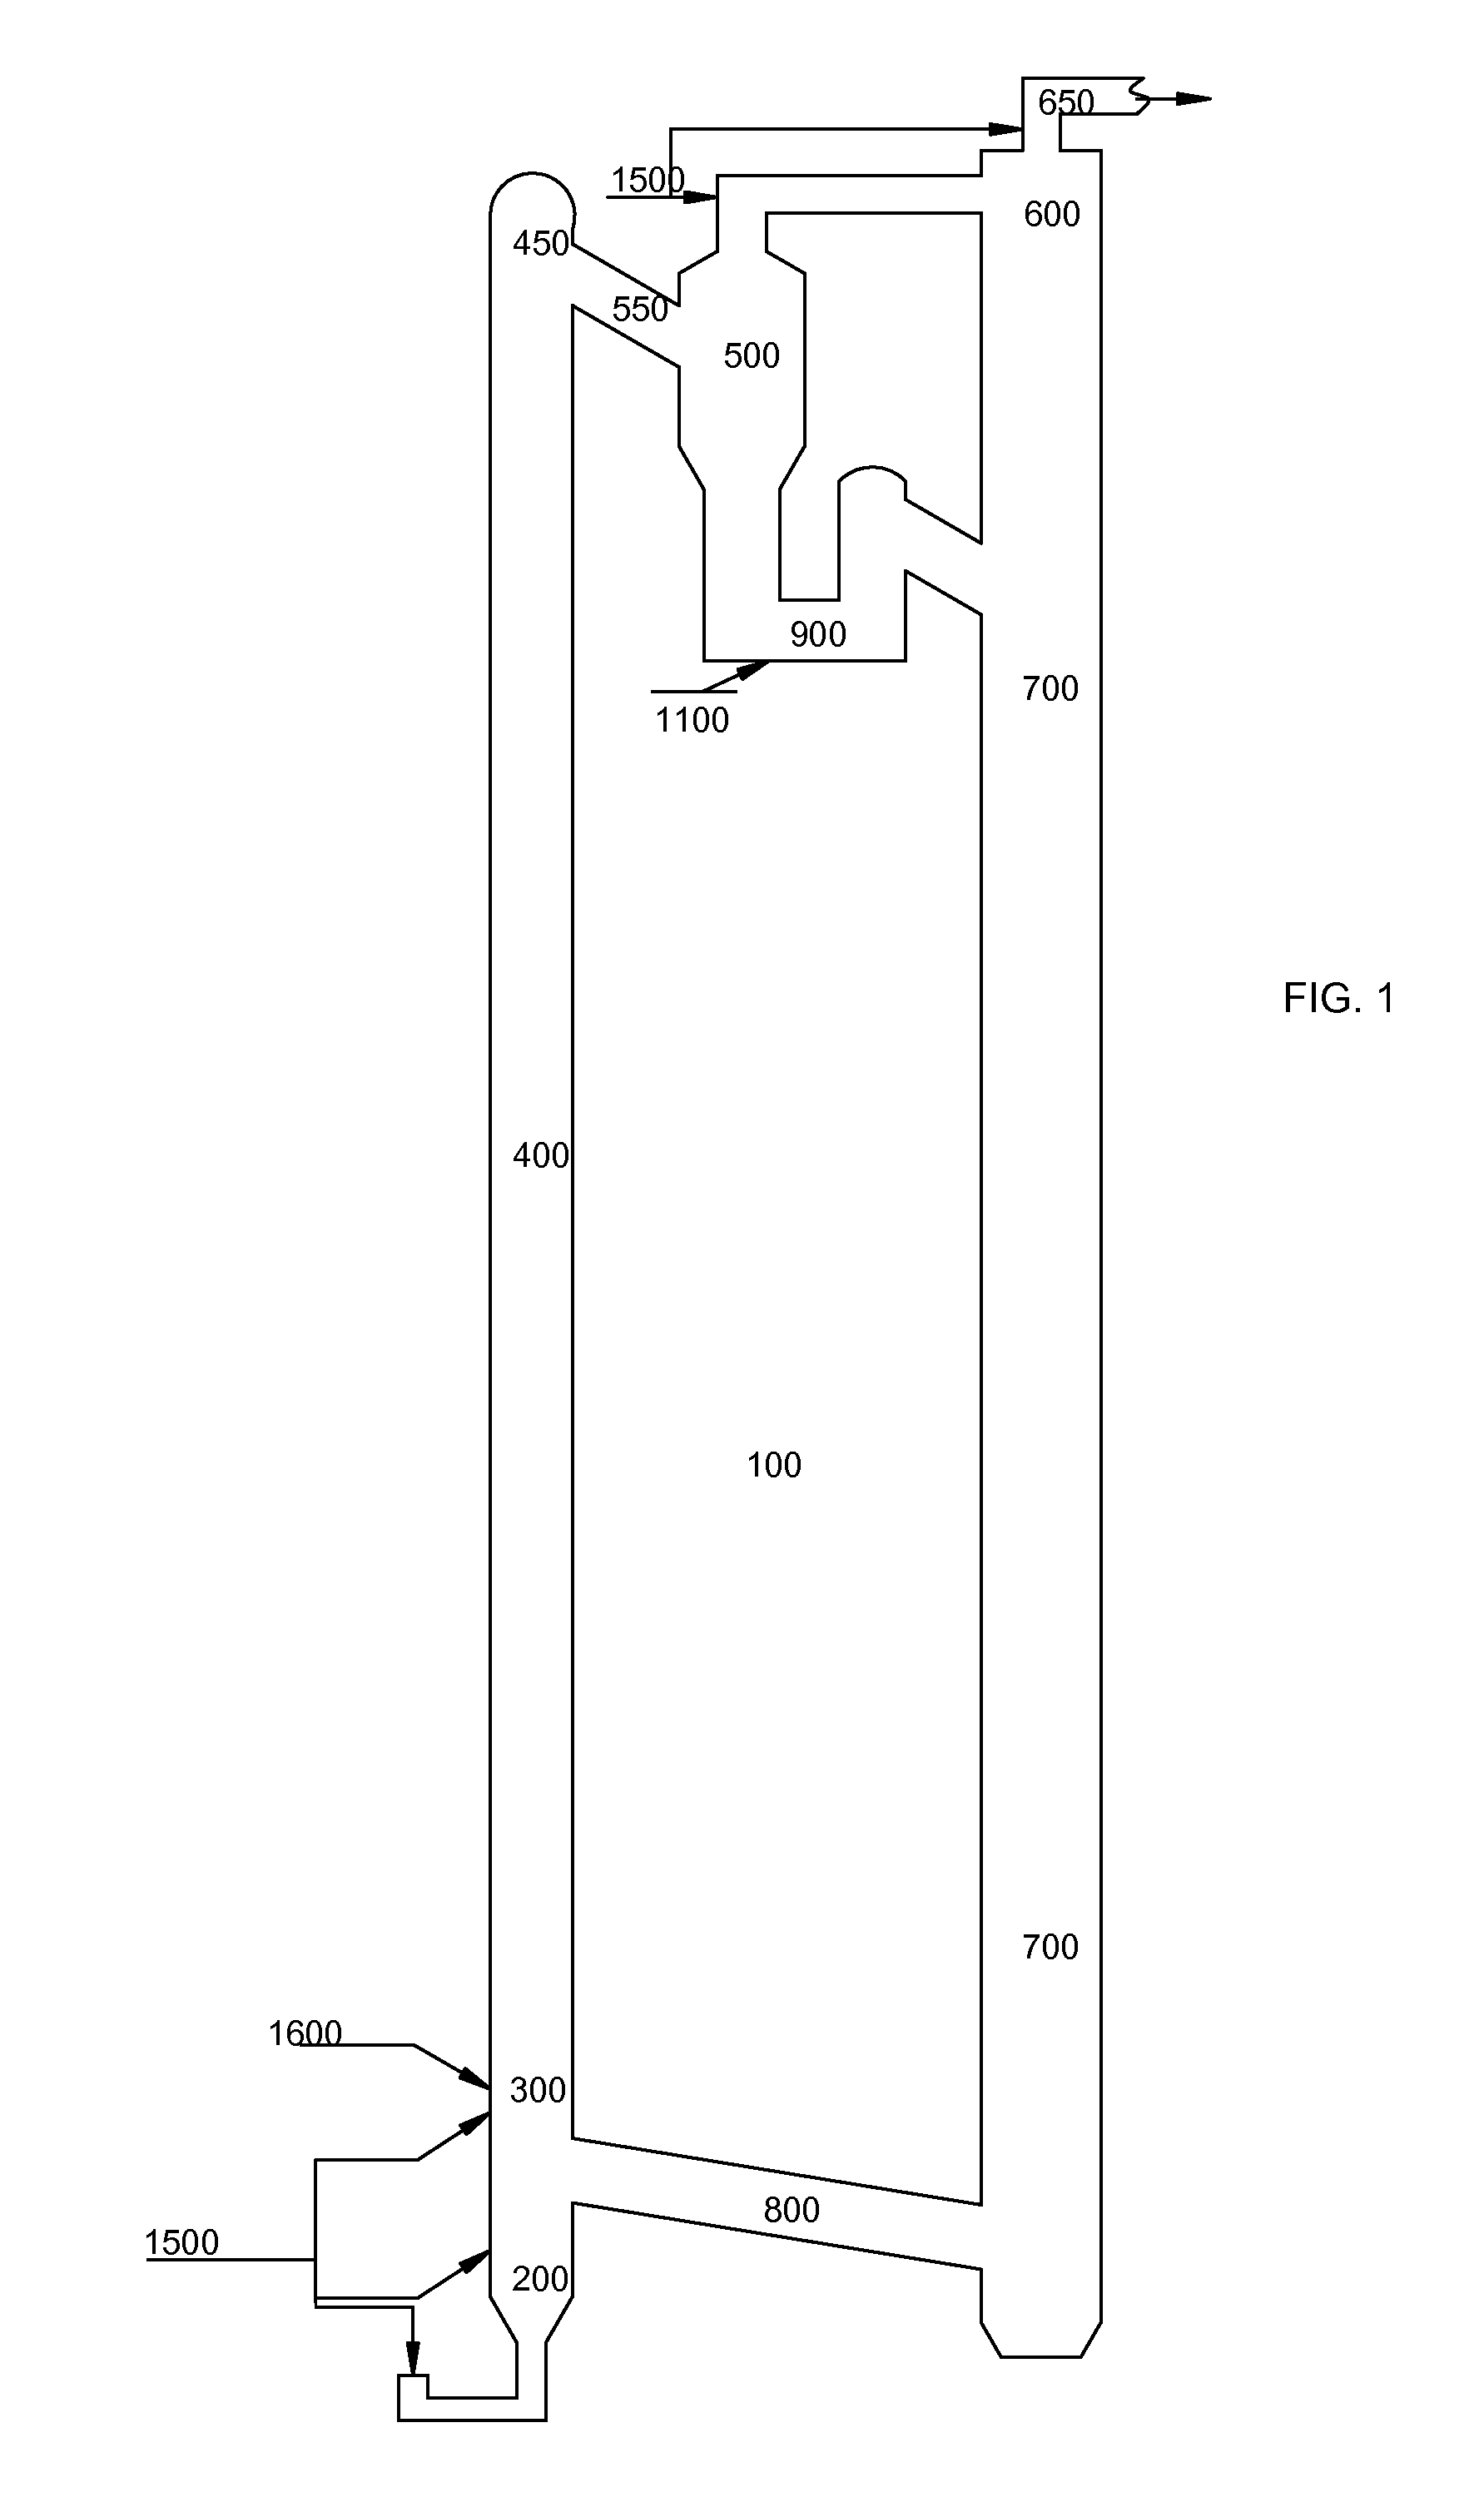 Apparatus, components and operating methods for circulating fluidized bed transport gasifiers and reactors